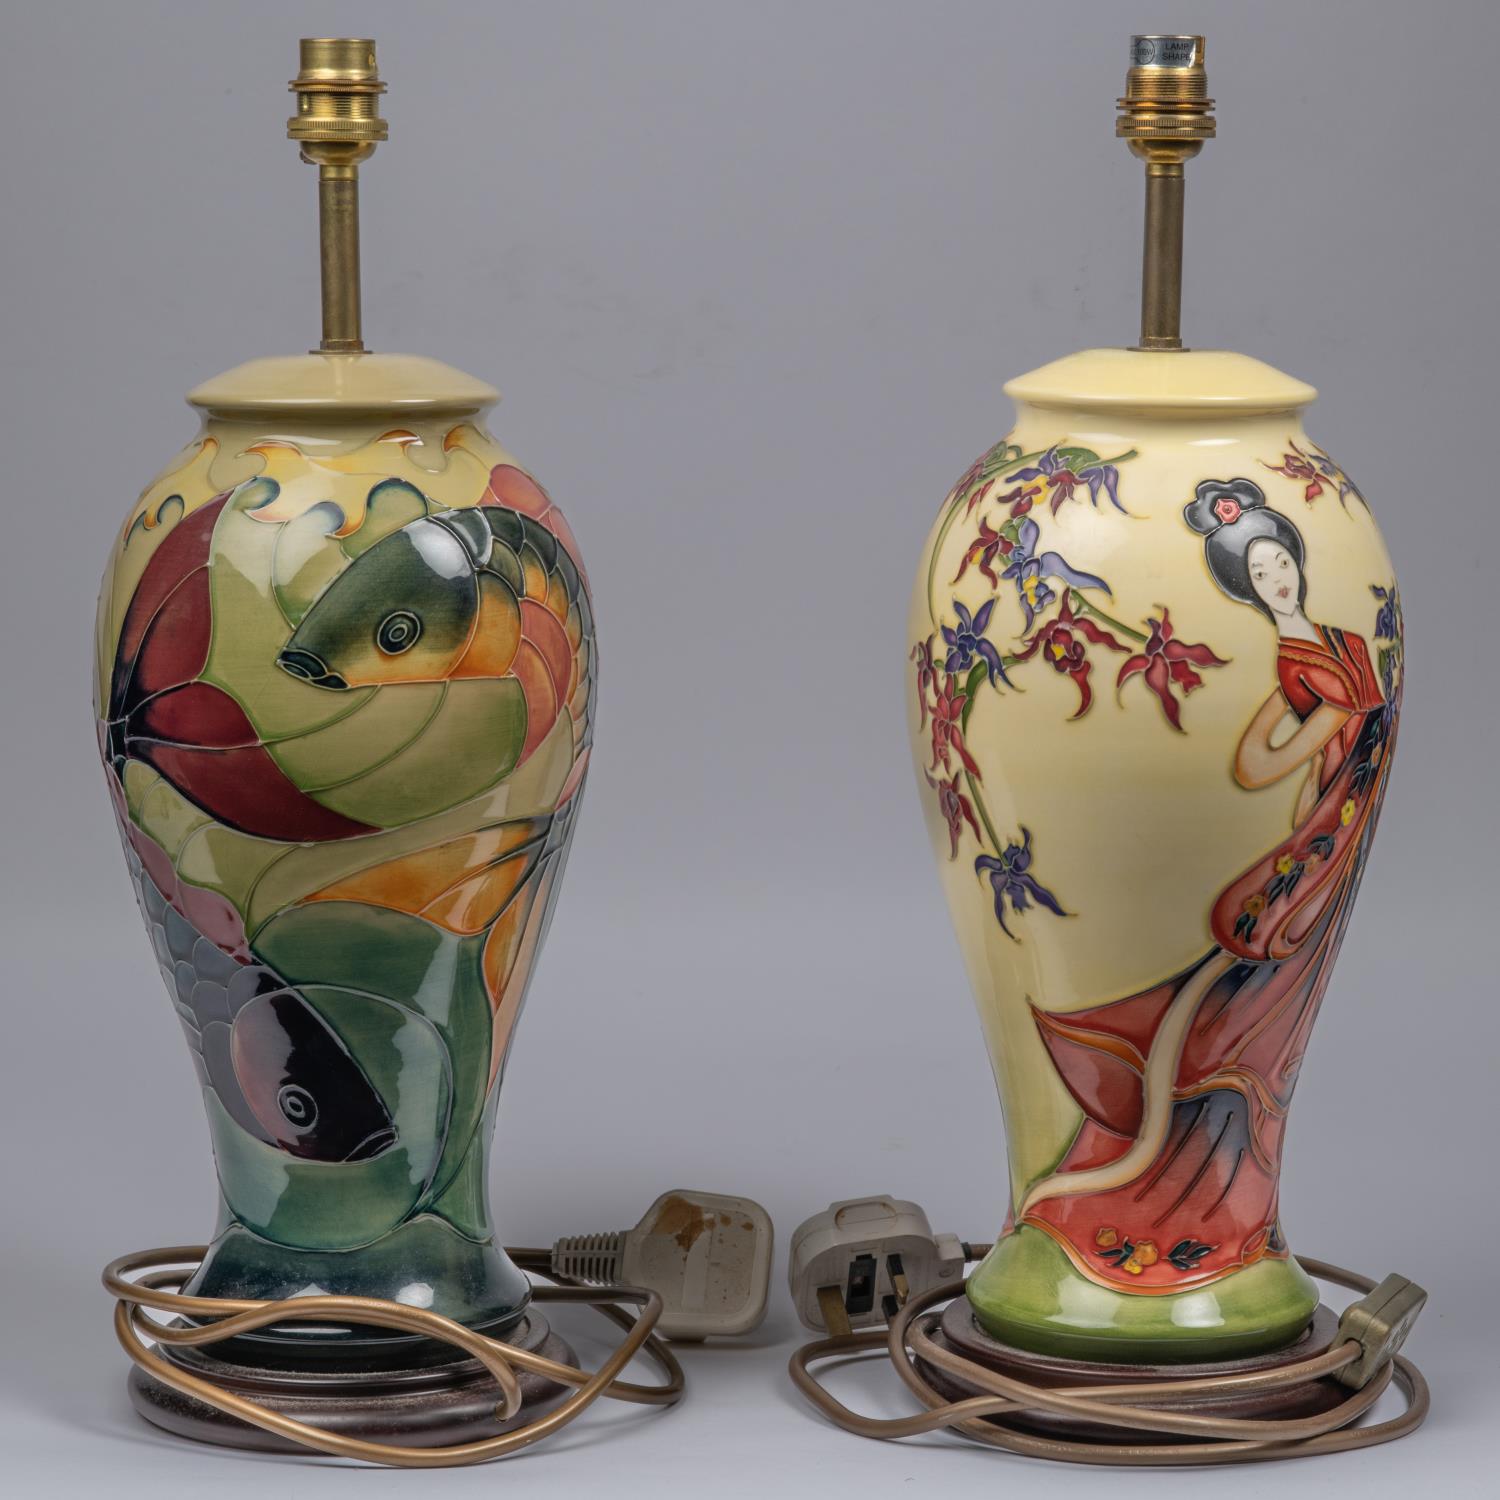 Two Moorcroft pottery lamp vases. One with a Japanese scene and one with a fish design. Overall